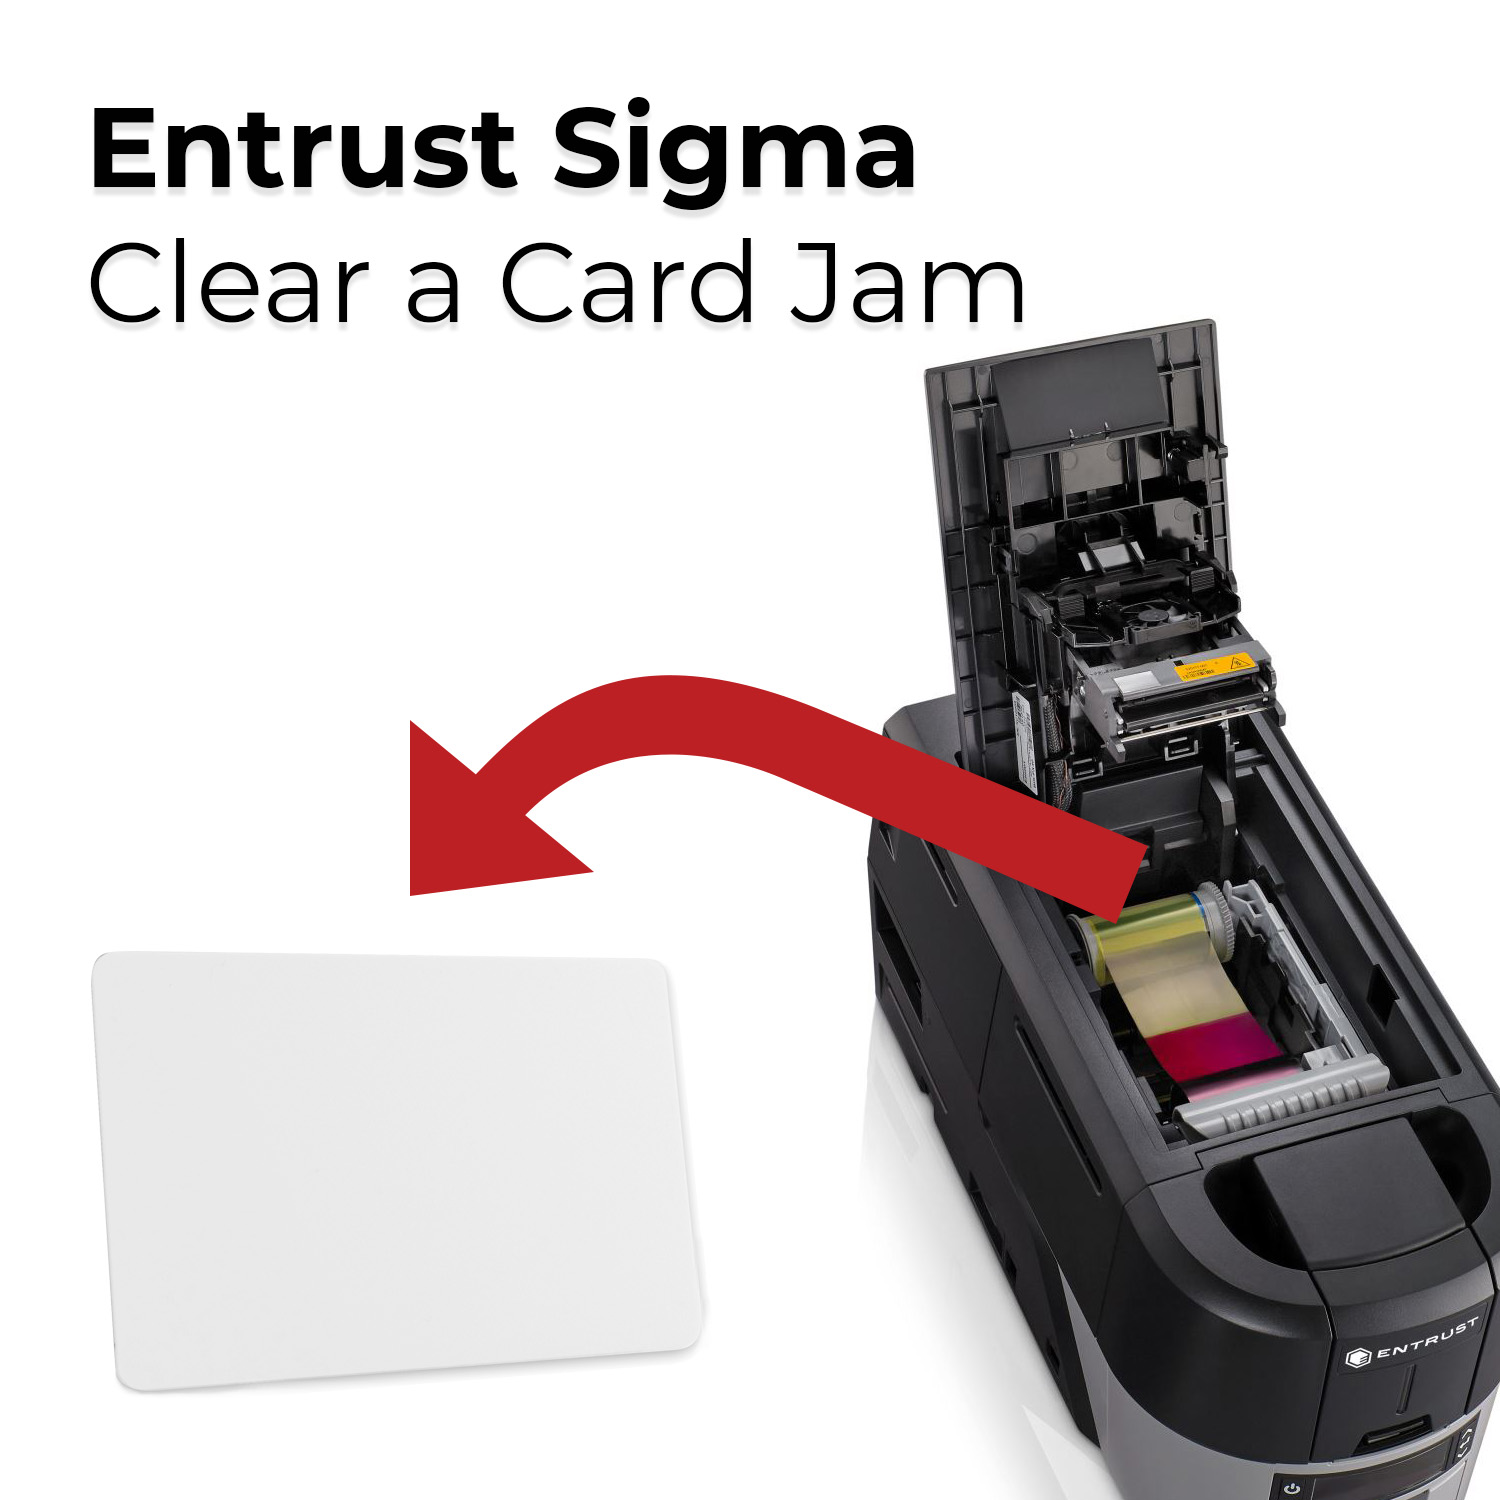 How to Clear a Card Jam with an Entrust Sigma DS1 or DS2